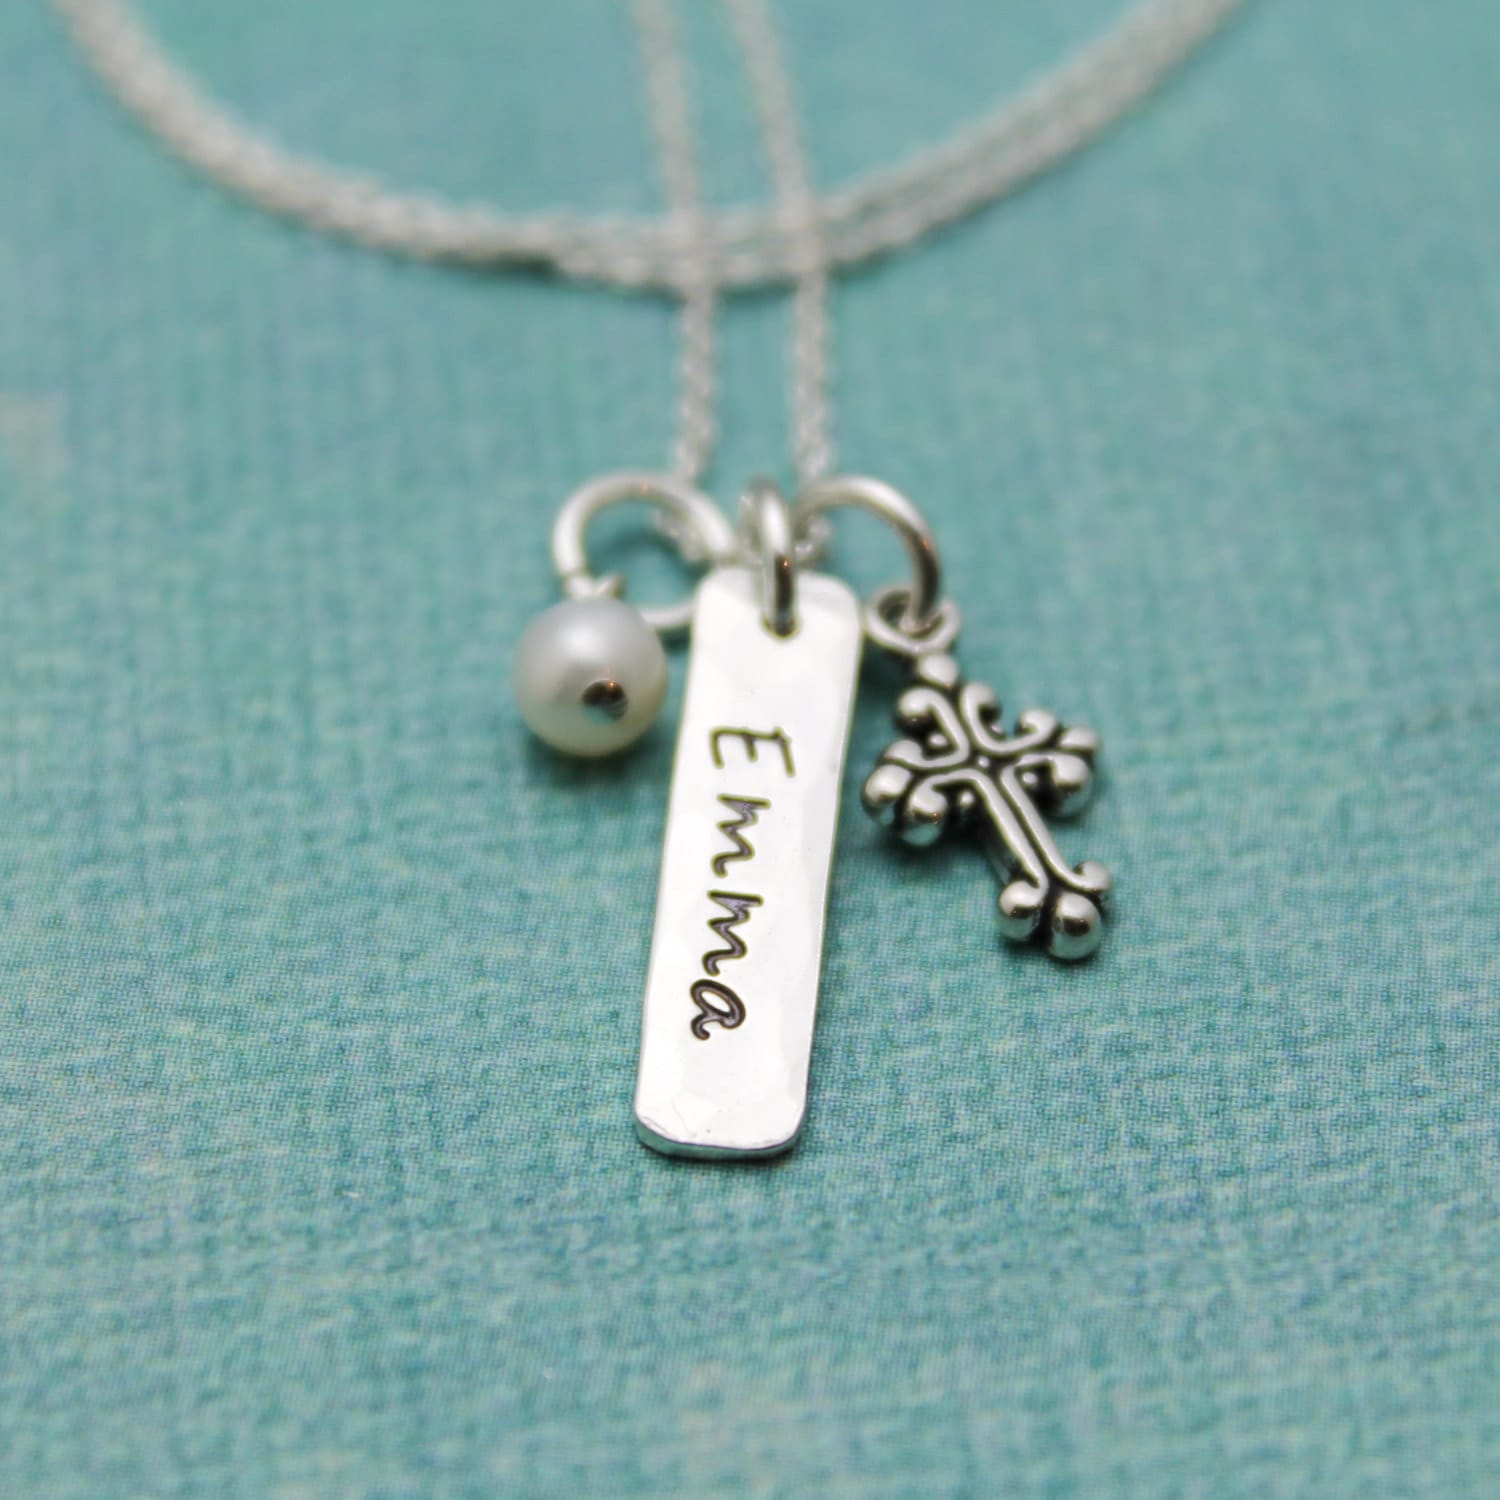 Cross Tag Necklace with Birthstone or Pearl for Confirmation Personalized Sterling Silver Hand Stamped Jewelry